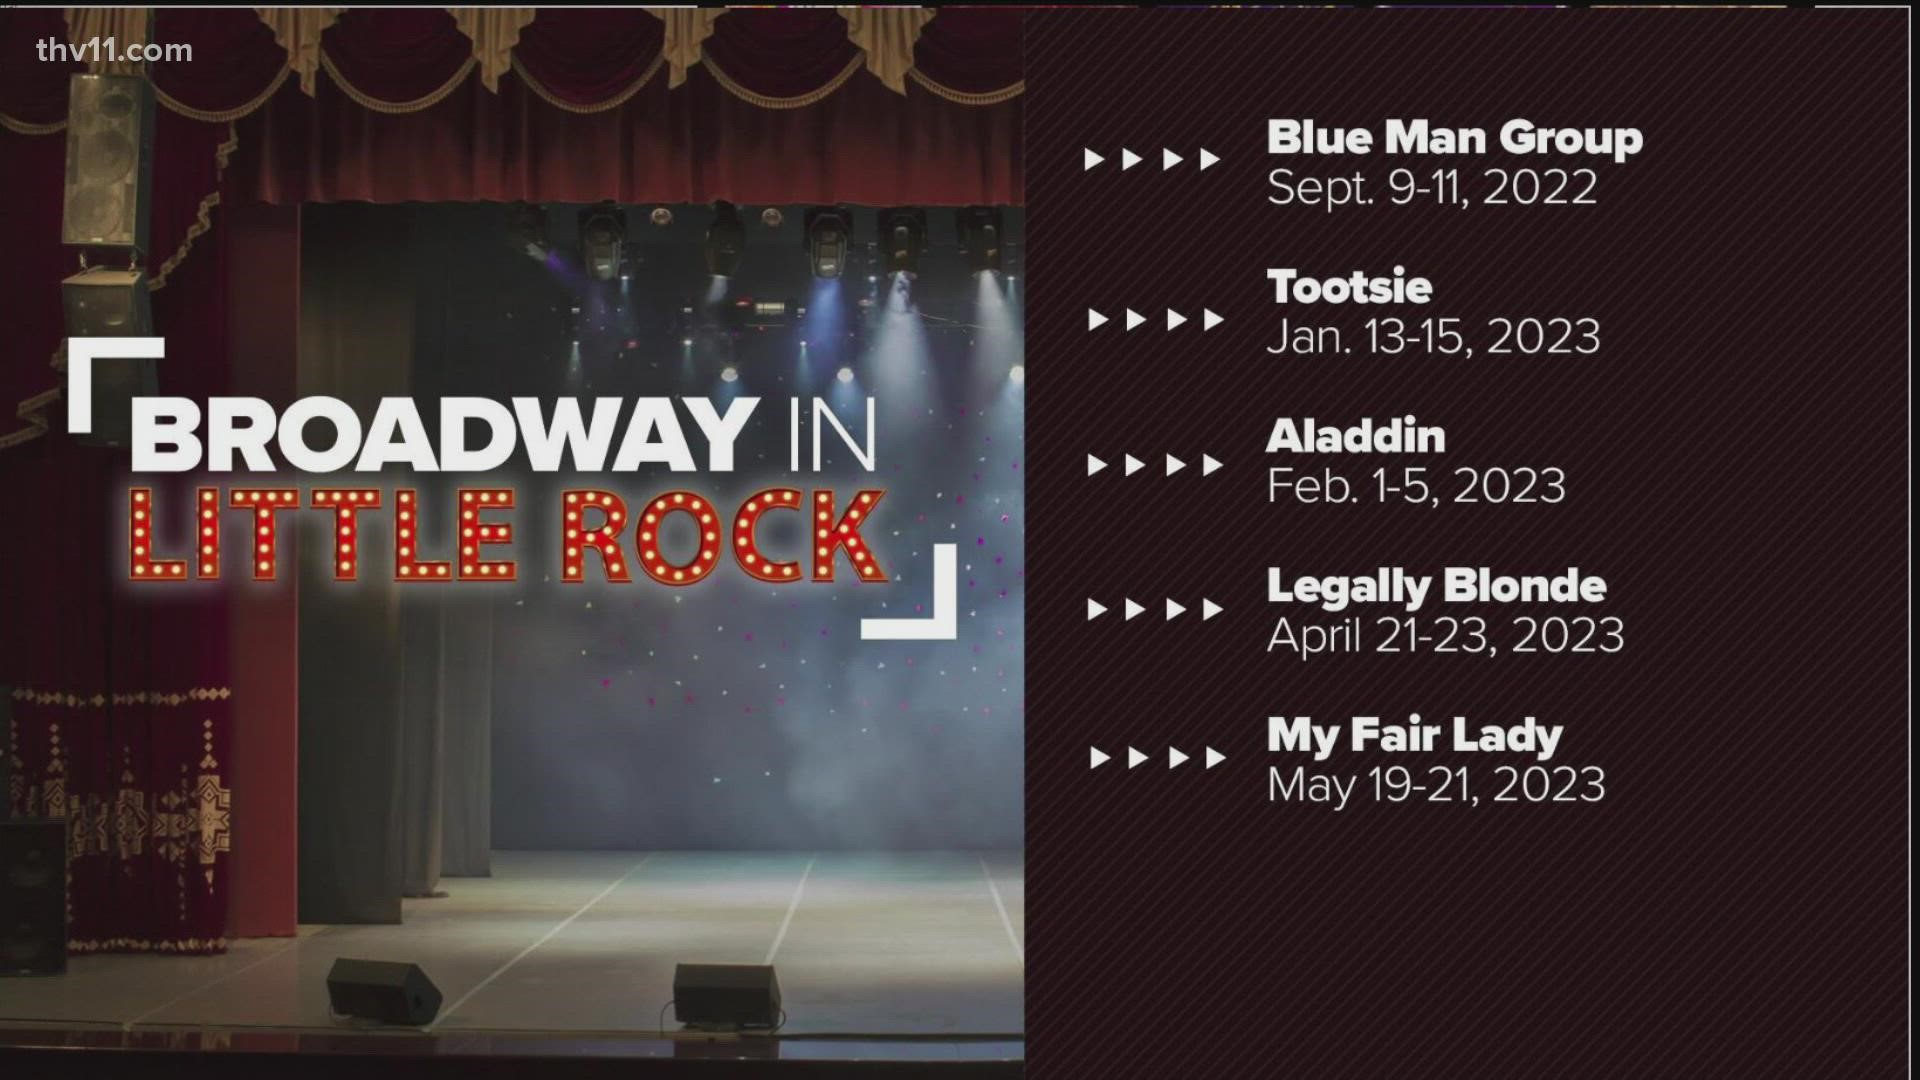 A new lineup of Broadway shows are headed to Little Rock, as the new season is set to start in September.